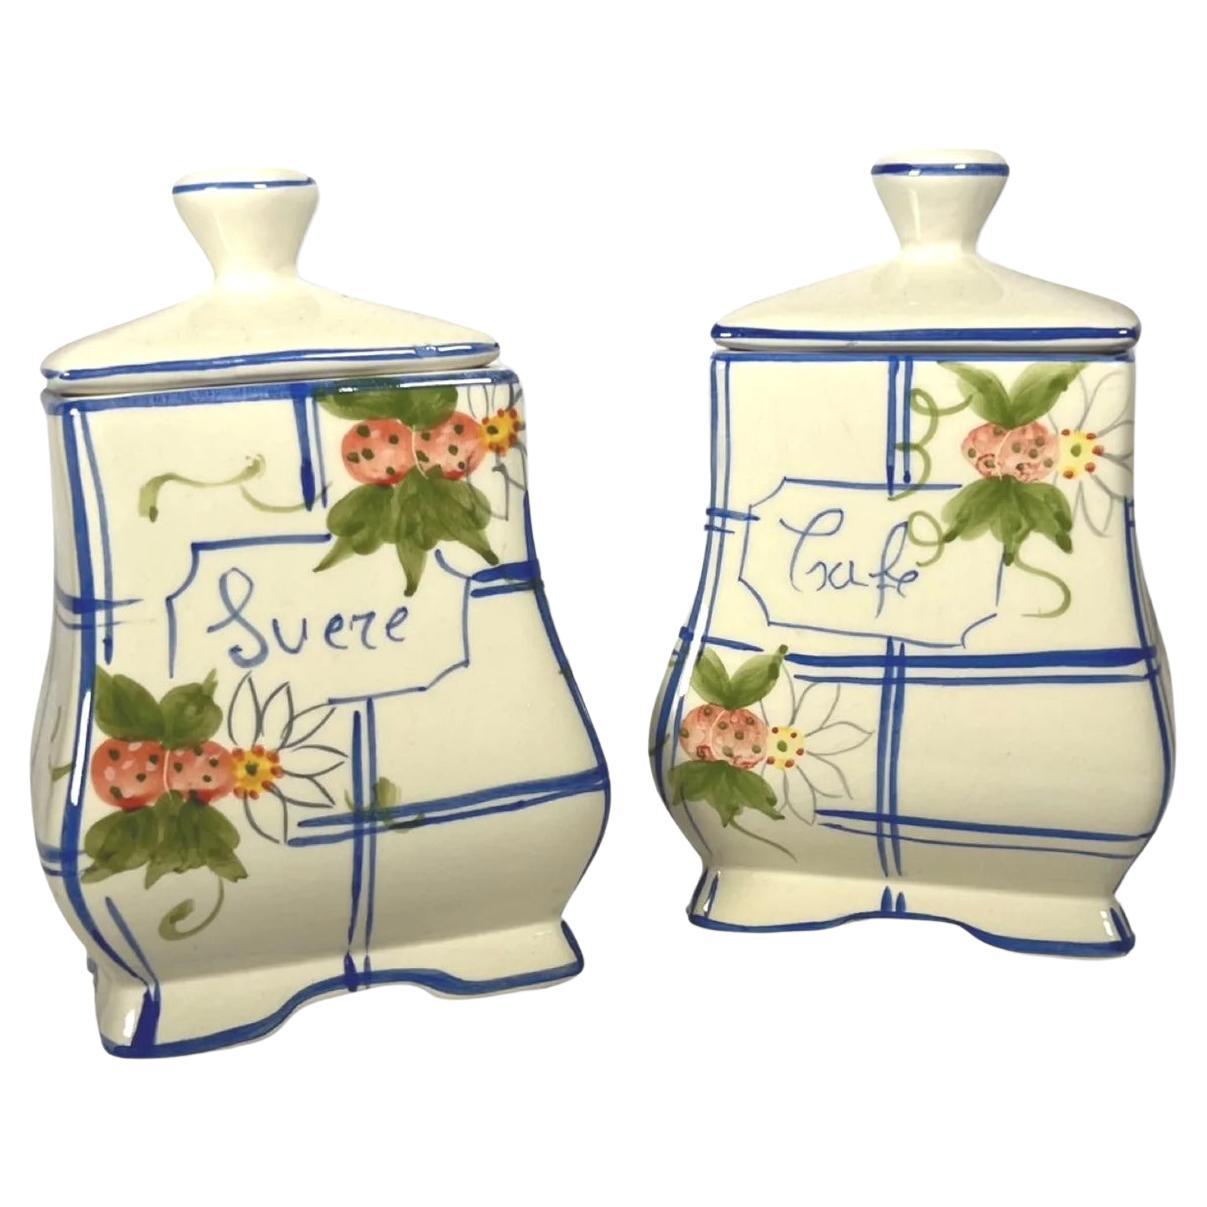 19th C. Parisienne Hand-Painted Porcelain 'Cafe & Sucre" Canisters For Sale